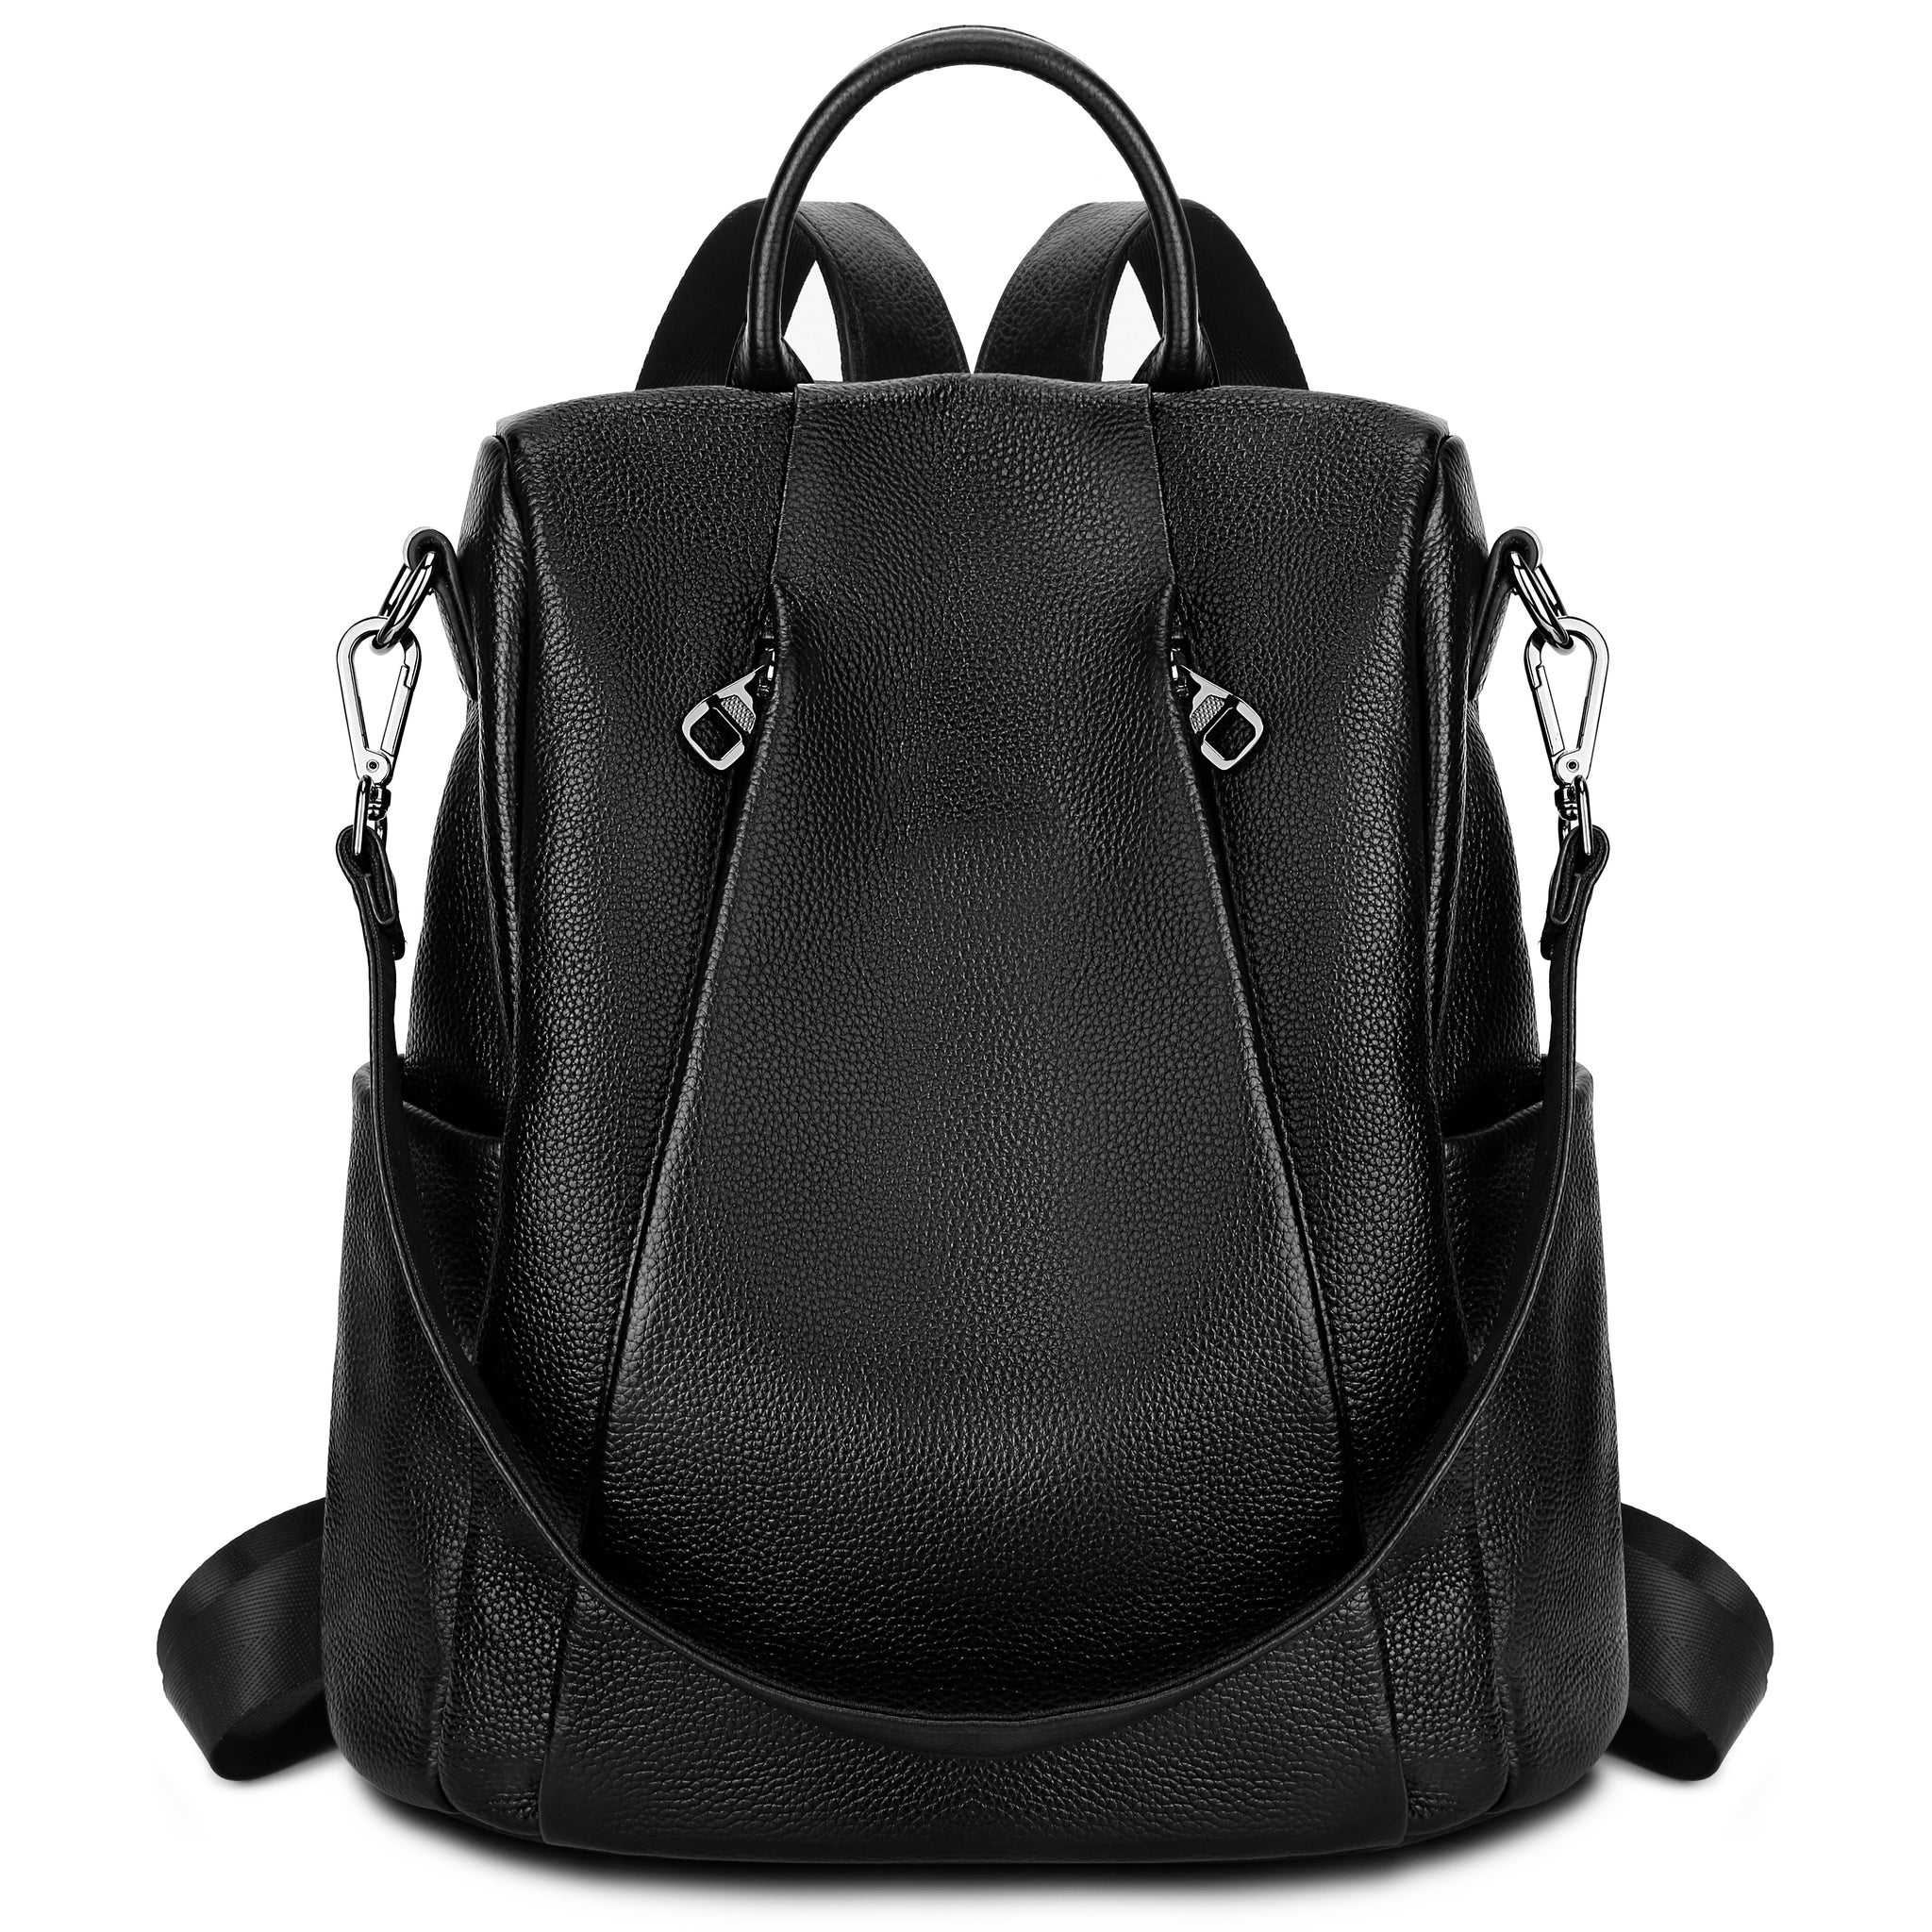 TL Bag Soft leather backpack | Clothing bags and leather accessories